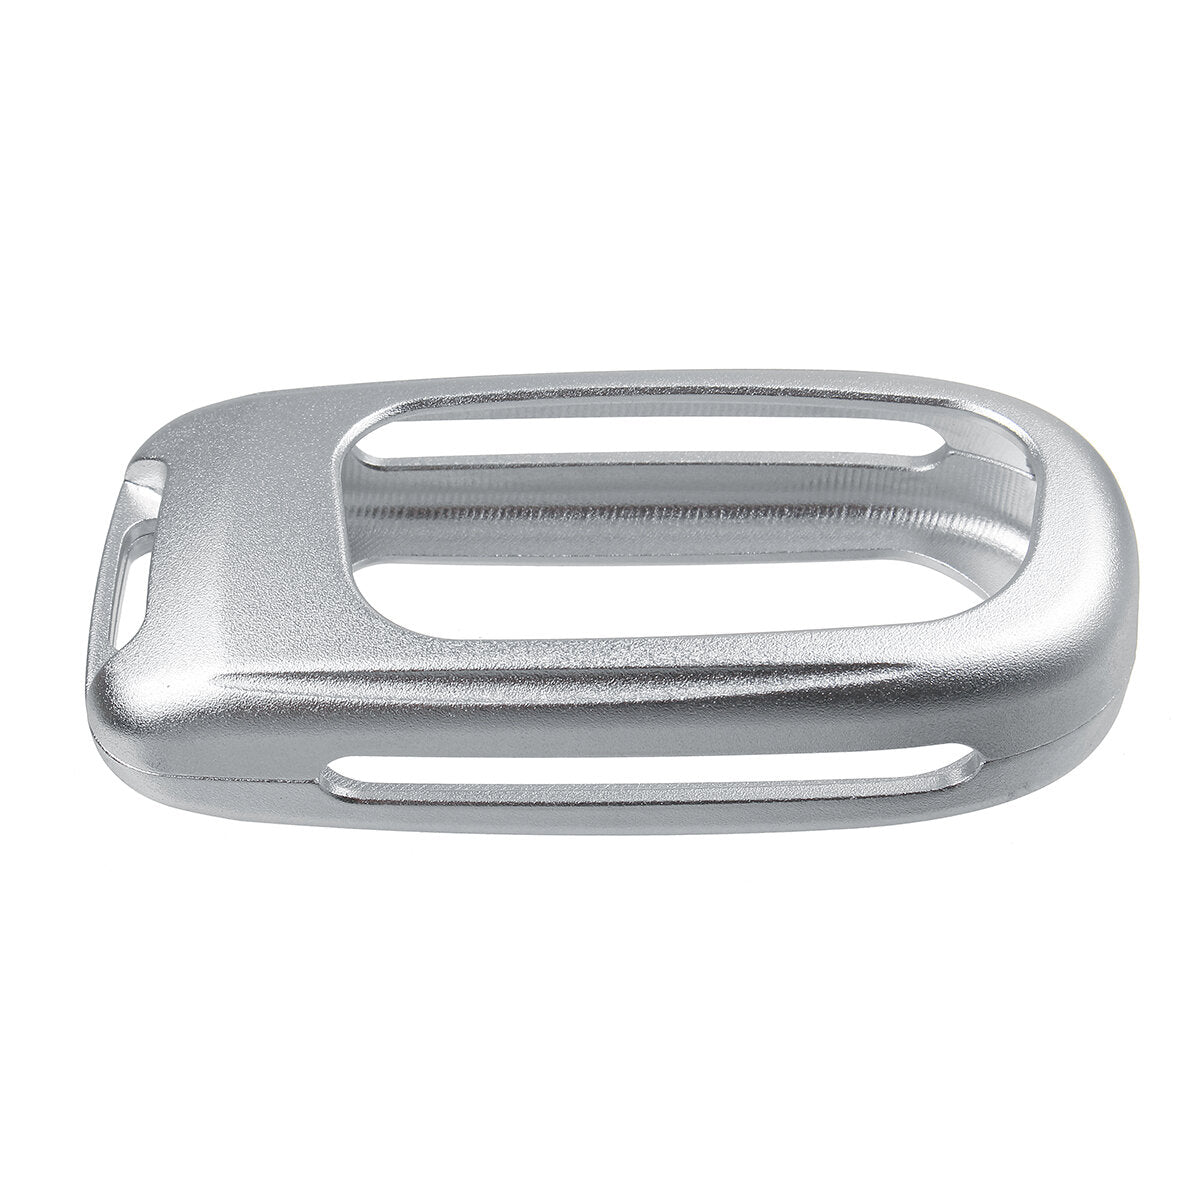 aluminium afstandsbediening sleutel cover fob case shell voor dodge jeep grand chrysler